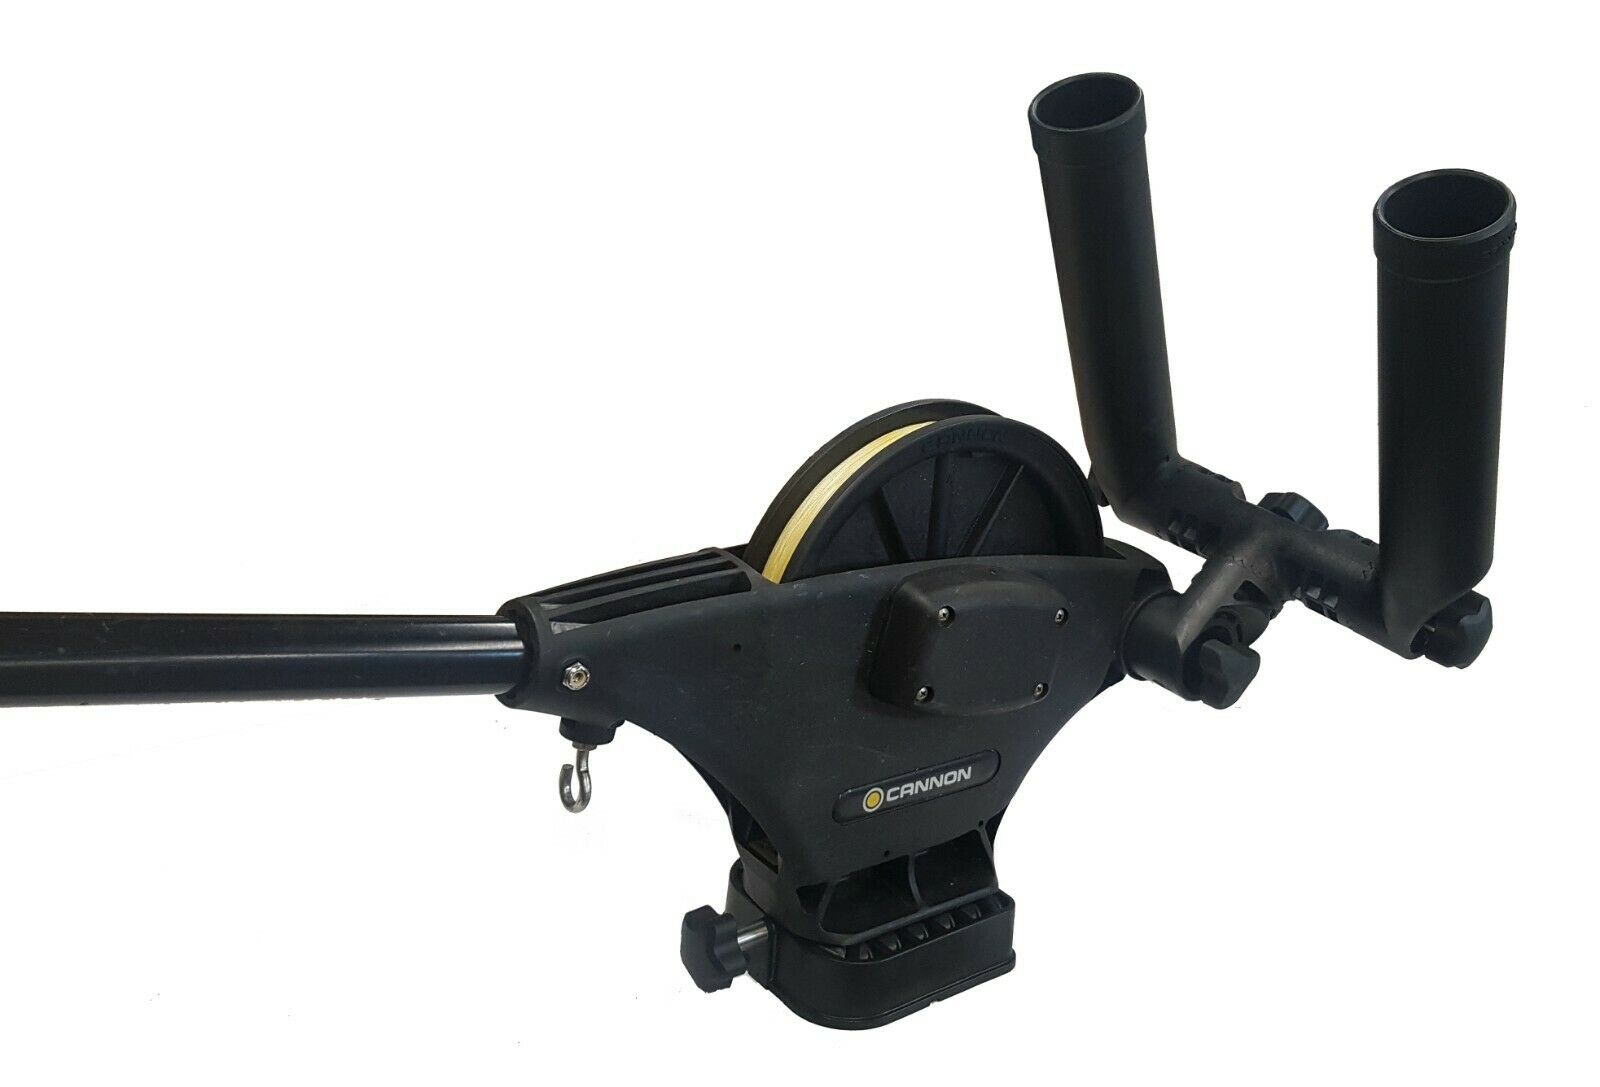 Cannon Downrigger Dual Adjustable Rod Holder Kit / New Style - Switch In Seconds